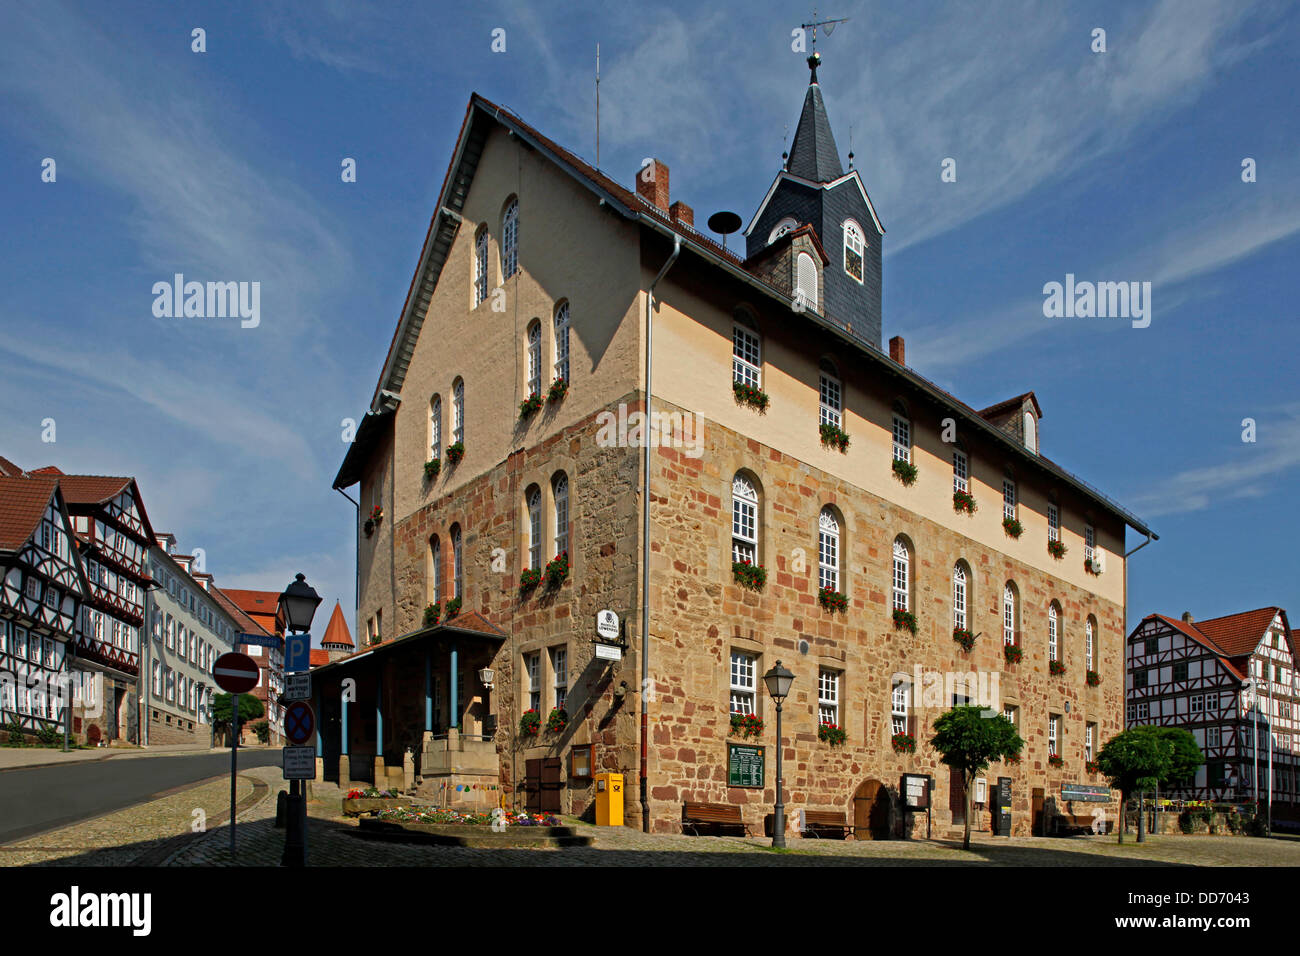 The town is known best of all for its Schloss Spangenberg, a castle built in 1253 and the town's landmark. Also worth seeing are the Town Hall and the half-timbered buildings in the Old Town and the remains of the town's old wall, several of whose towers a Stock Photo